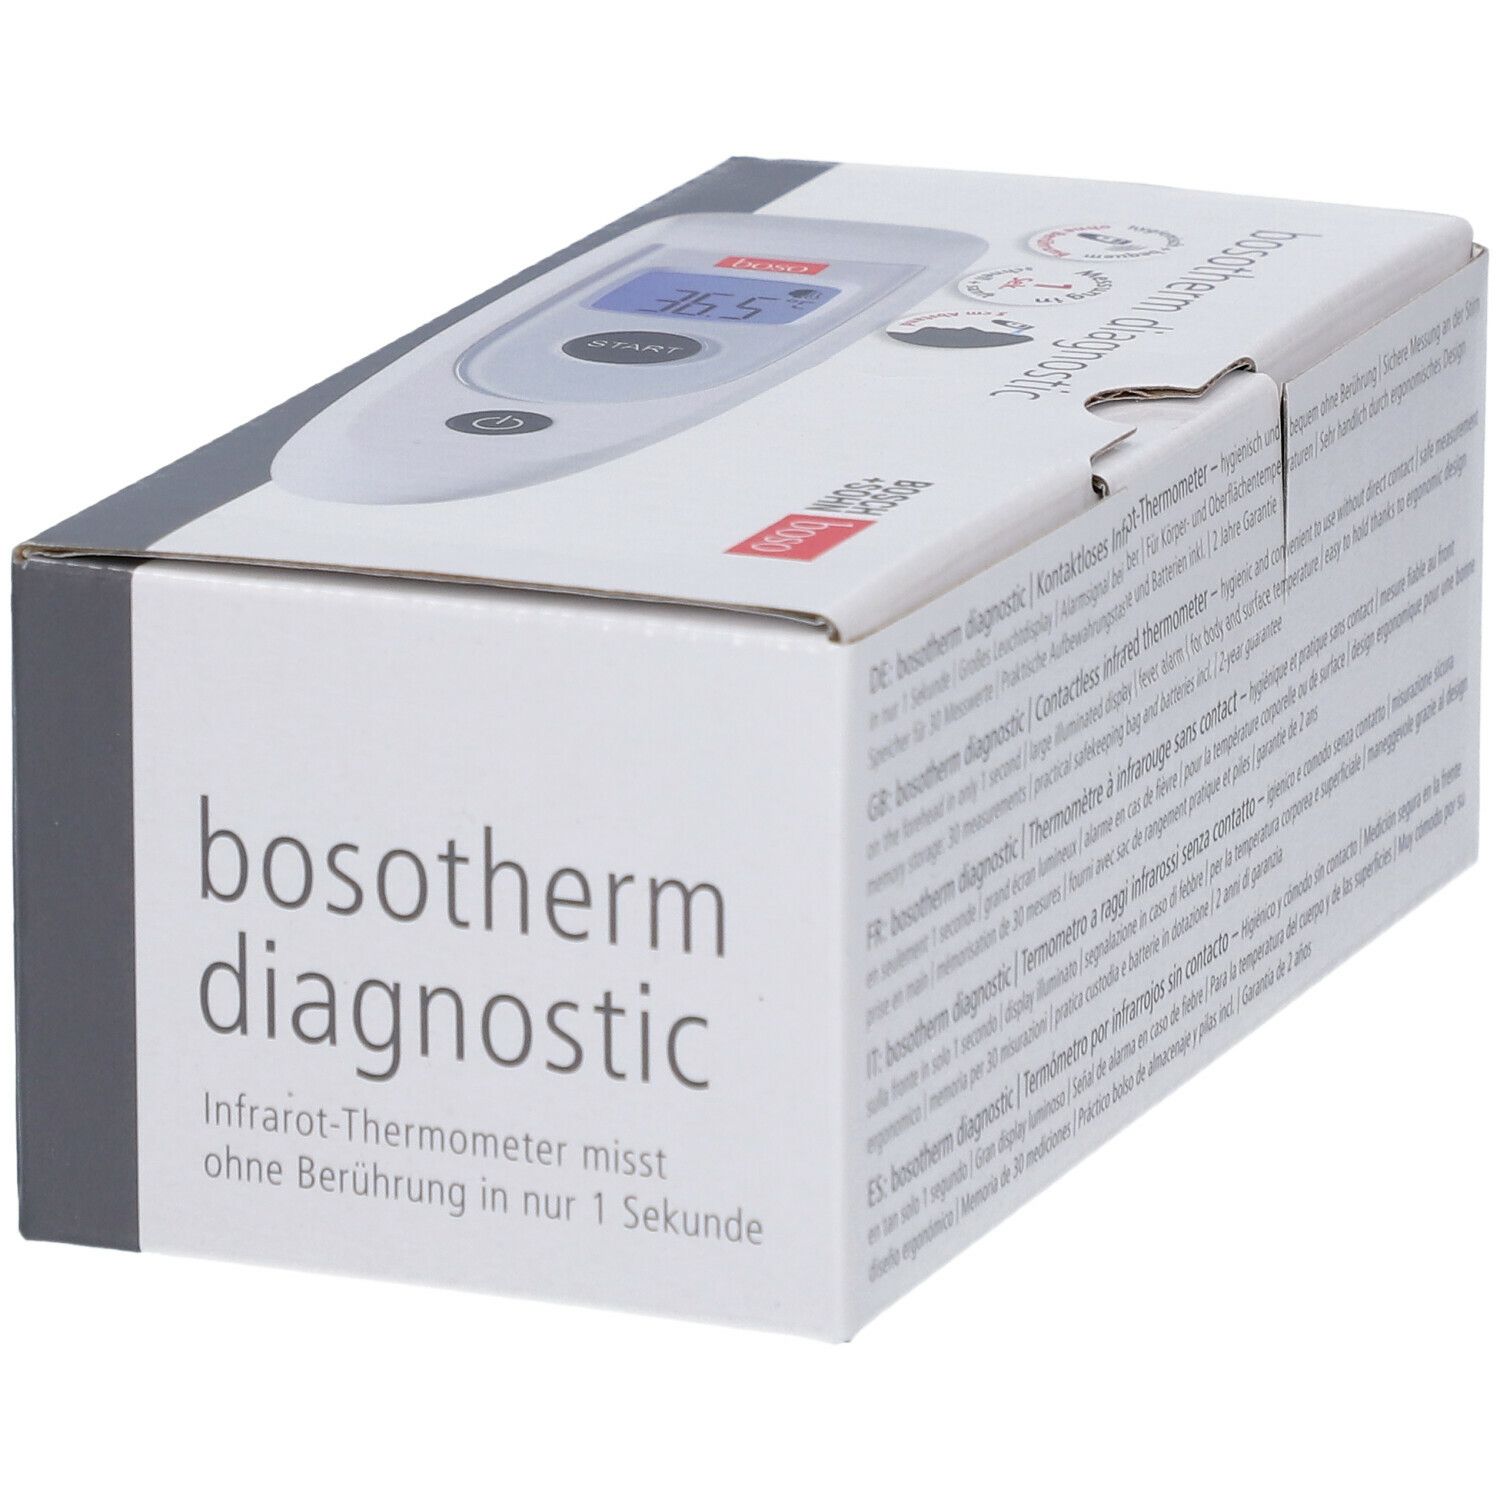 bosotherm diagnostic Fieberthermometer